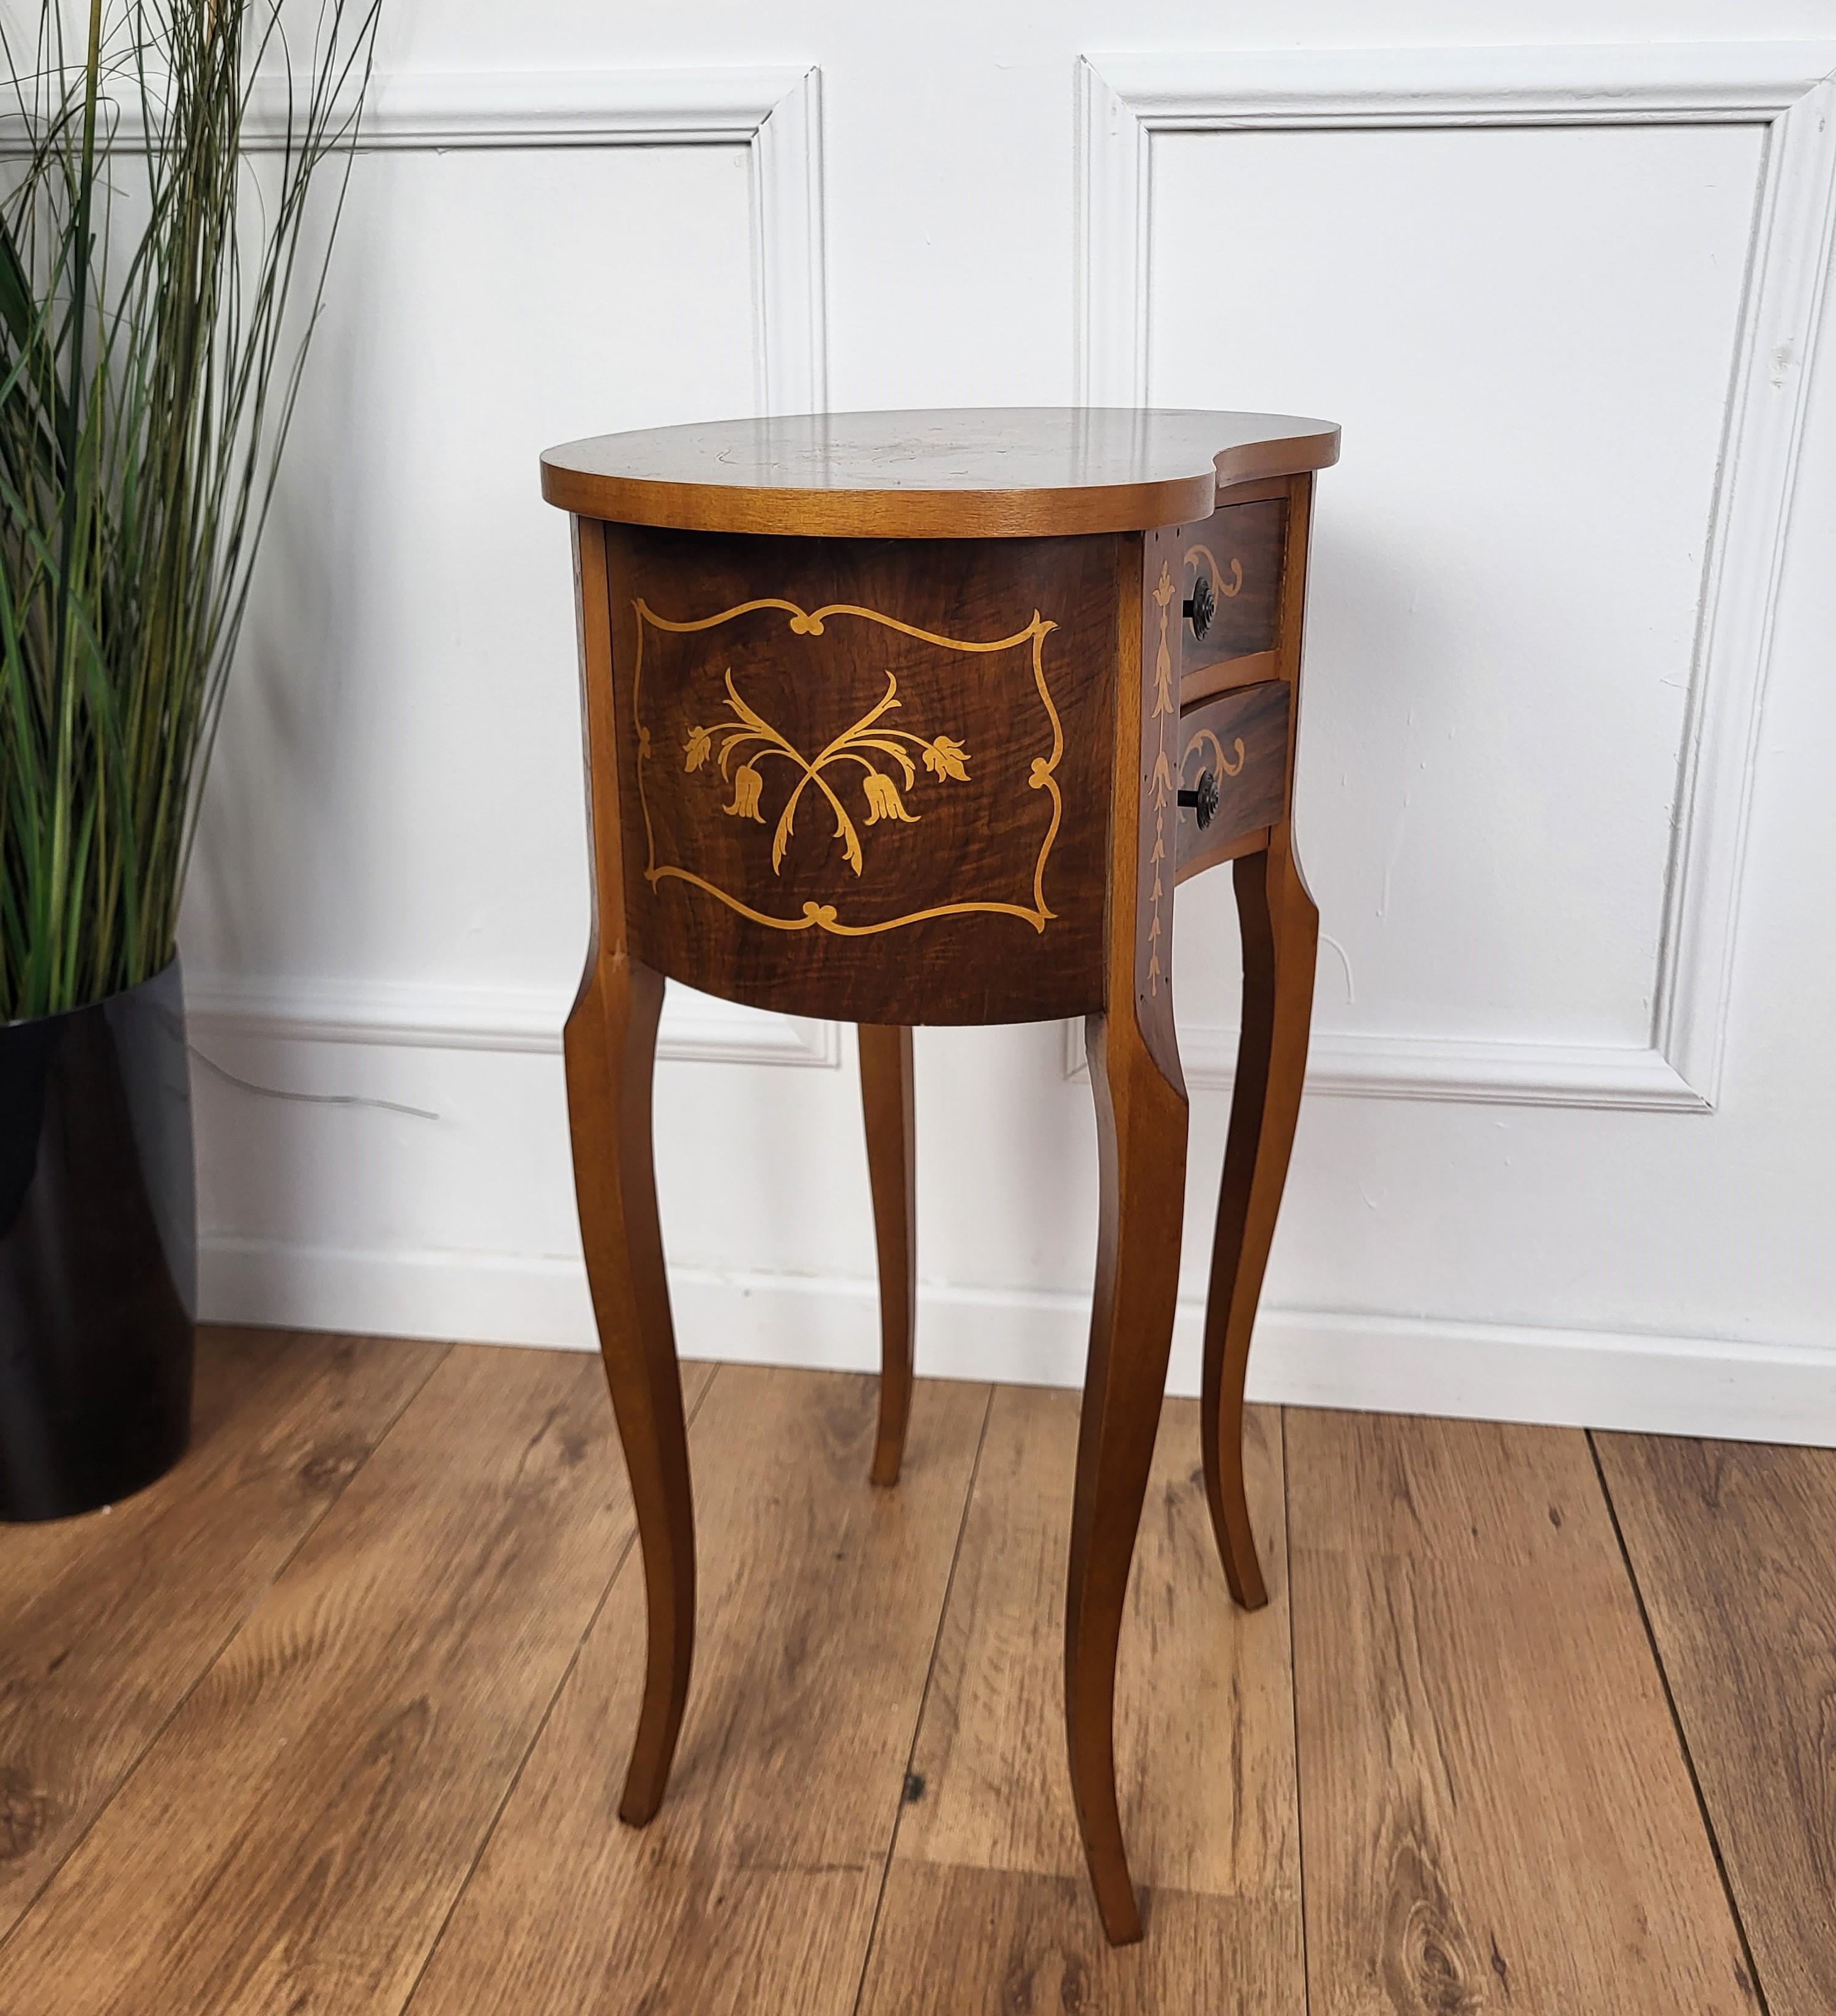 20th Century Italian Antique Marquetry Kidney Shaped Walnut Side Table with Two Drawers For Sale